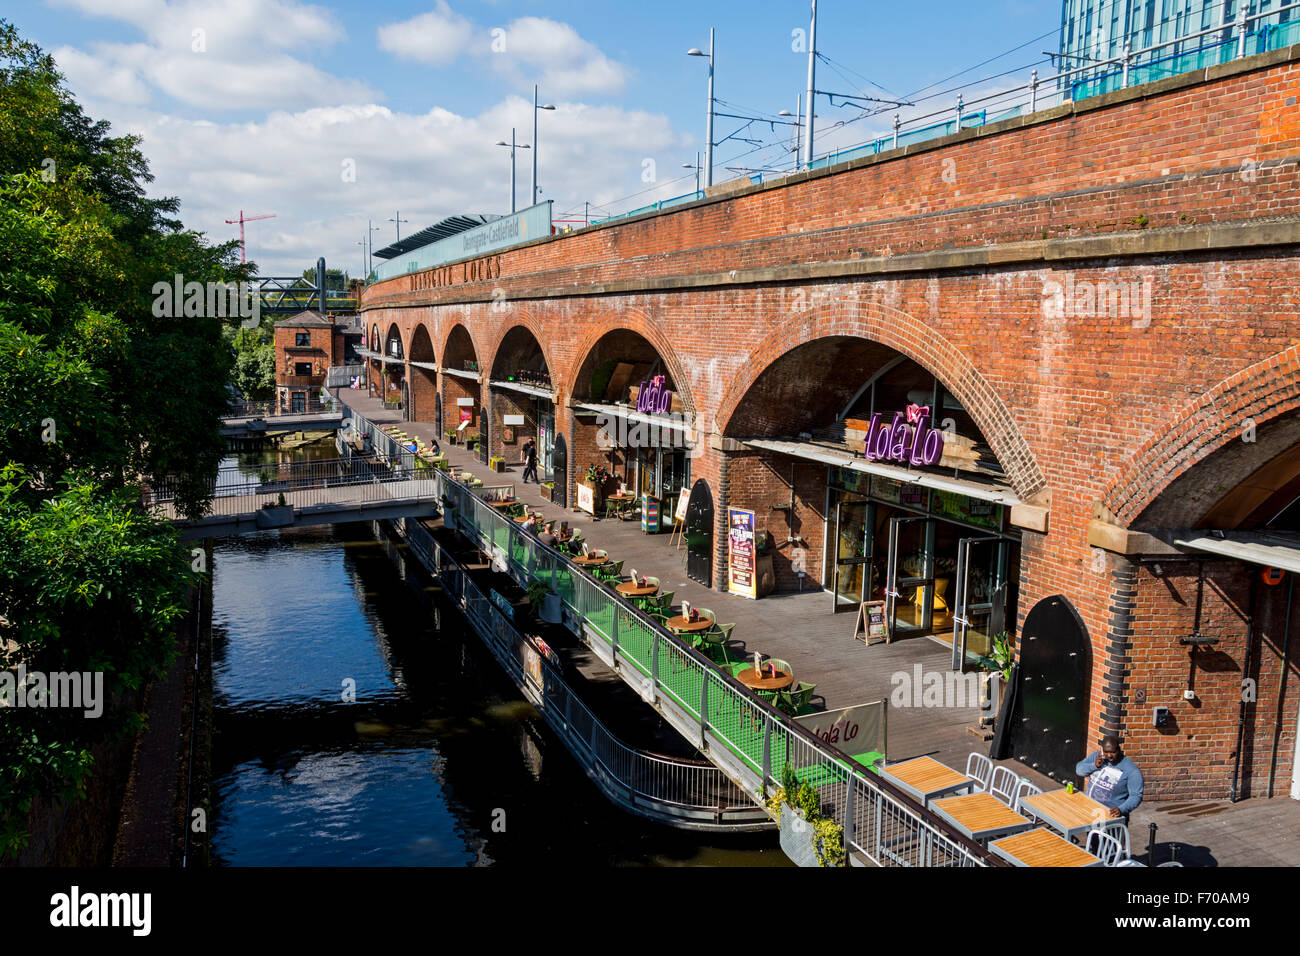 The Rochdale canal at Deansgate Locks, Whitworth Street West, Manchester, England, UK. Stock Photo